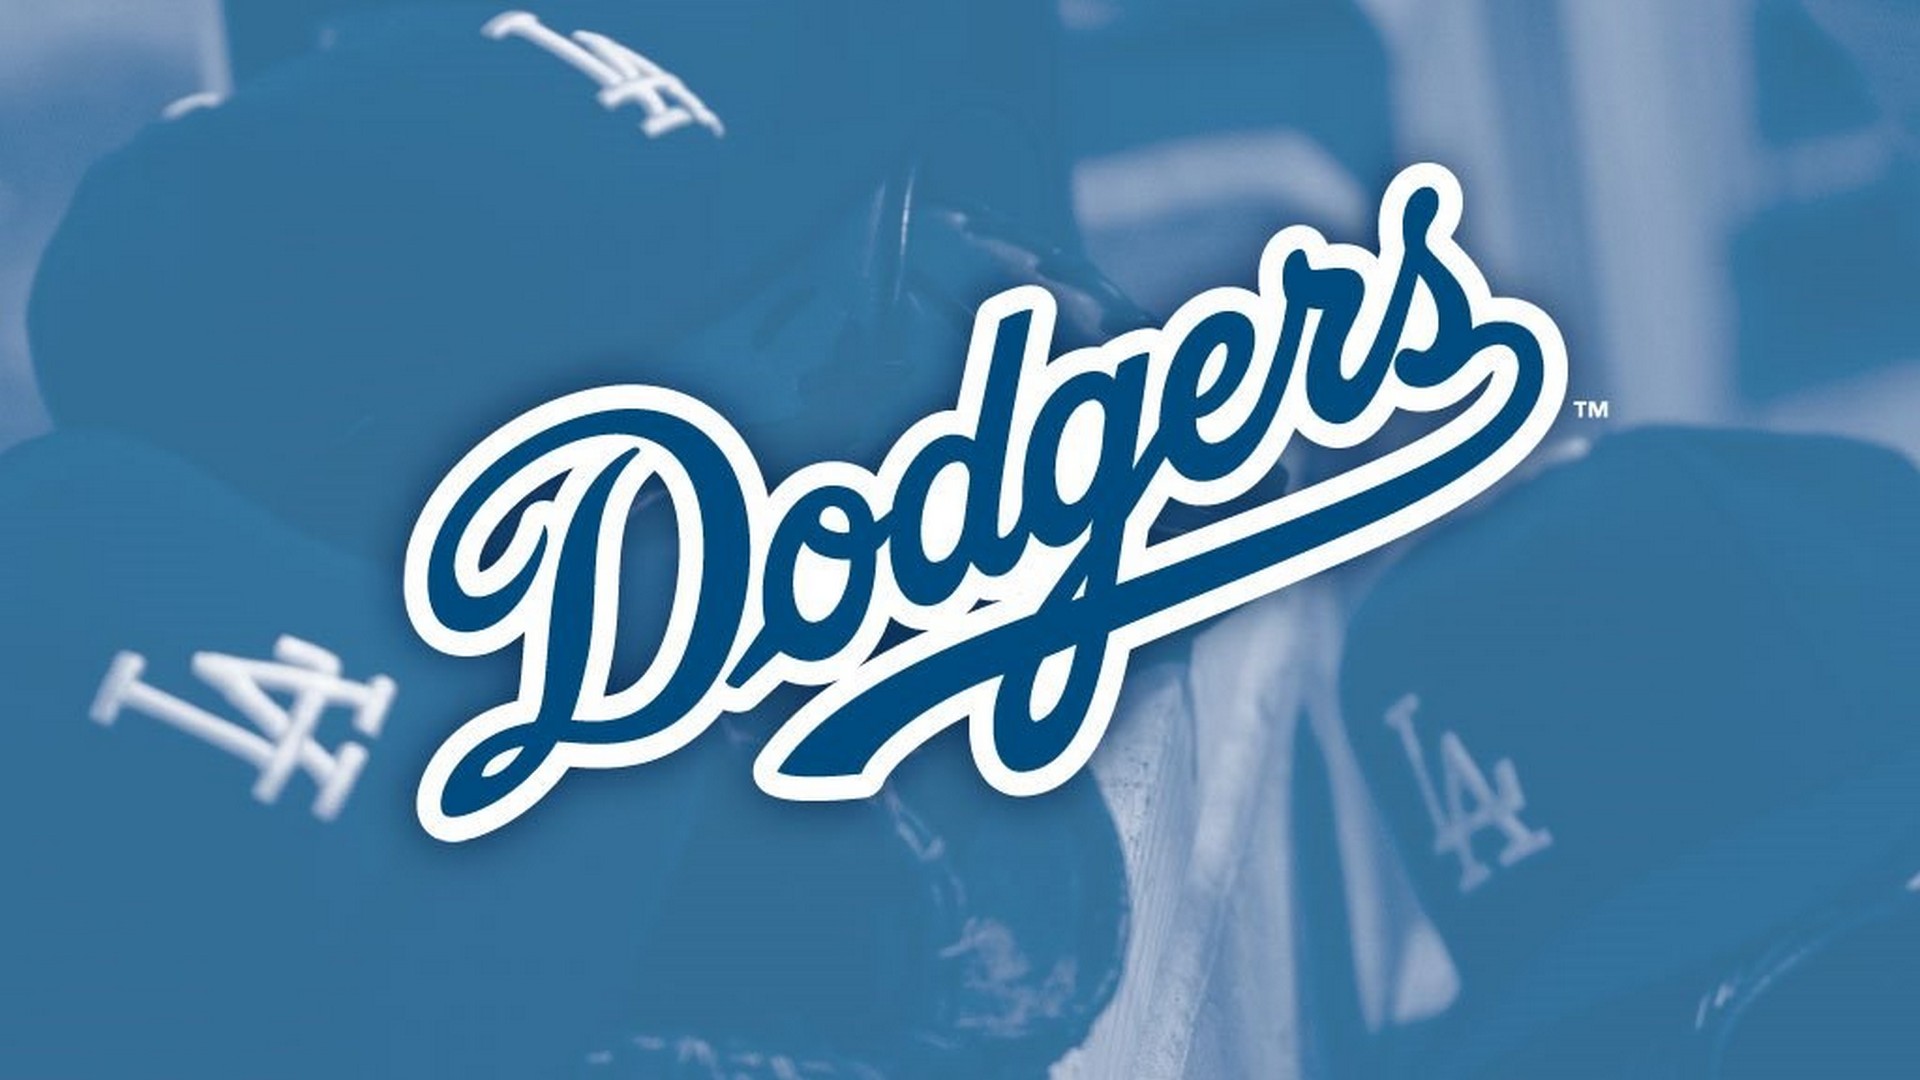 Los Angeles Dodgers For Desktop Wallpaper With high-resolution 1920X1080 pixel. You can use this wallpaper for Mac Desktop Wallpaper, Laptop Screensavers, Android Wallpapers, Tablet or iPhone Home Screen and another mobile phone device